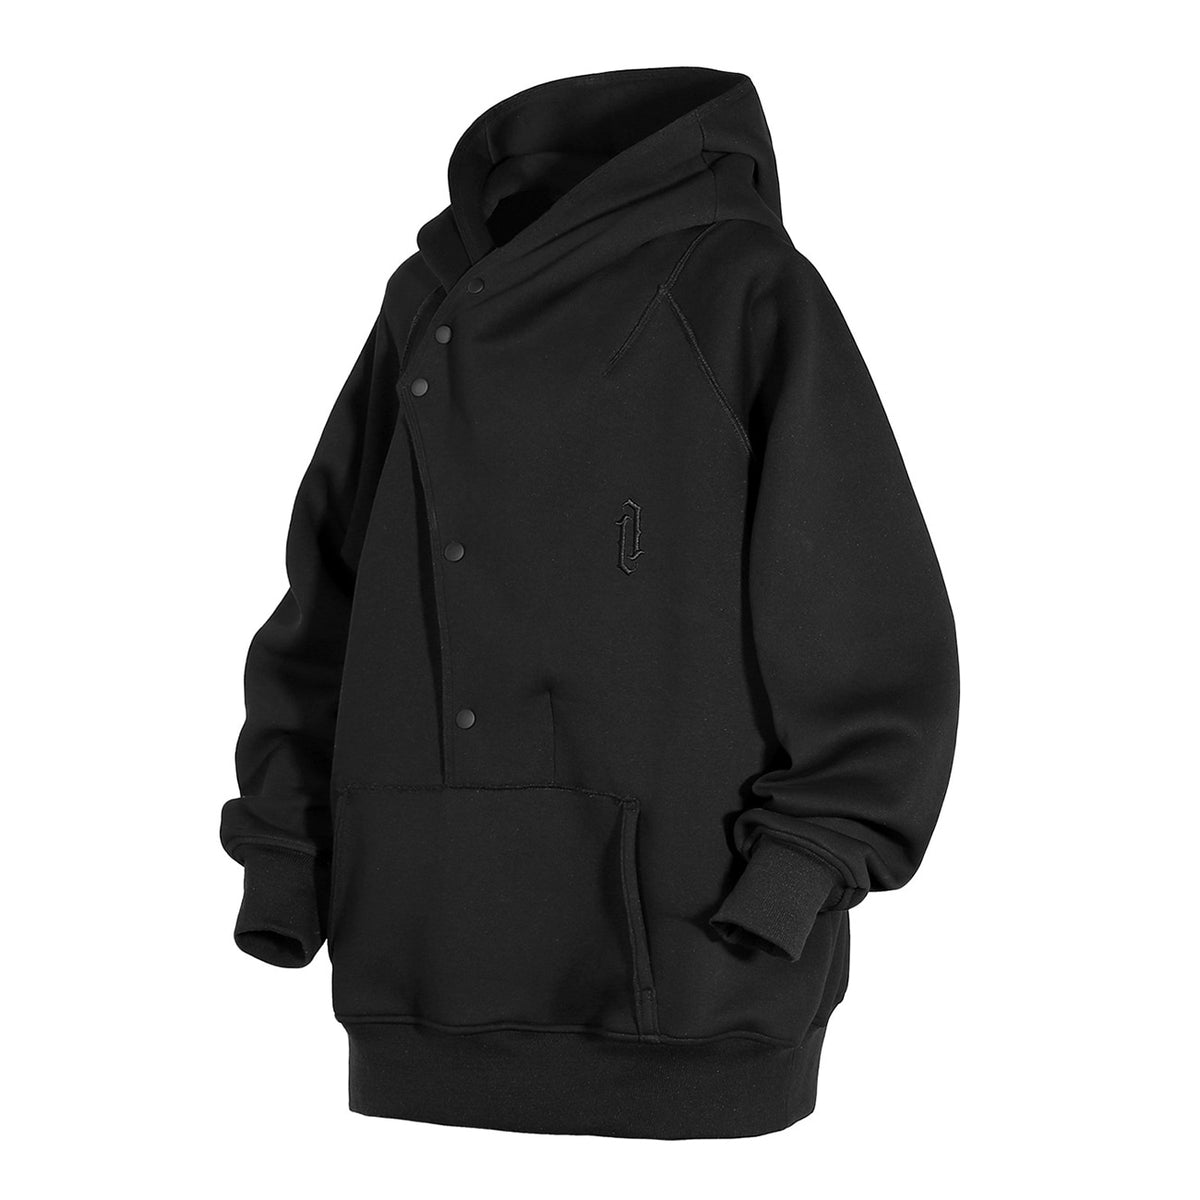 The Tactical Hoodie Techwear Summer is perfect for military, law ...